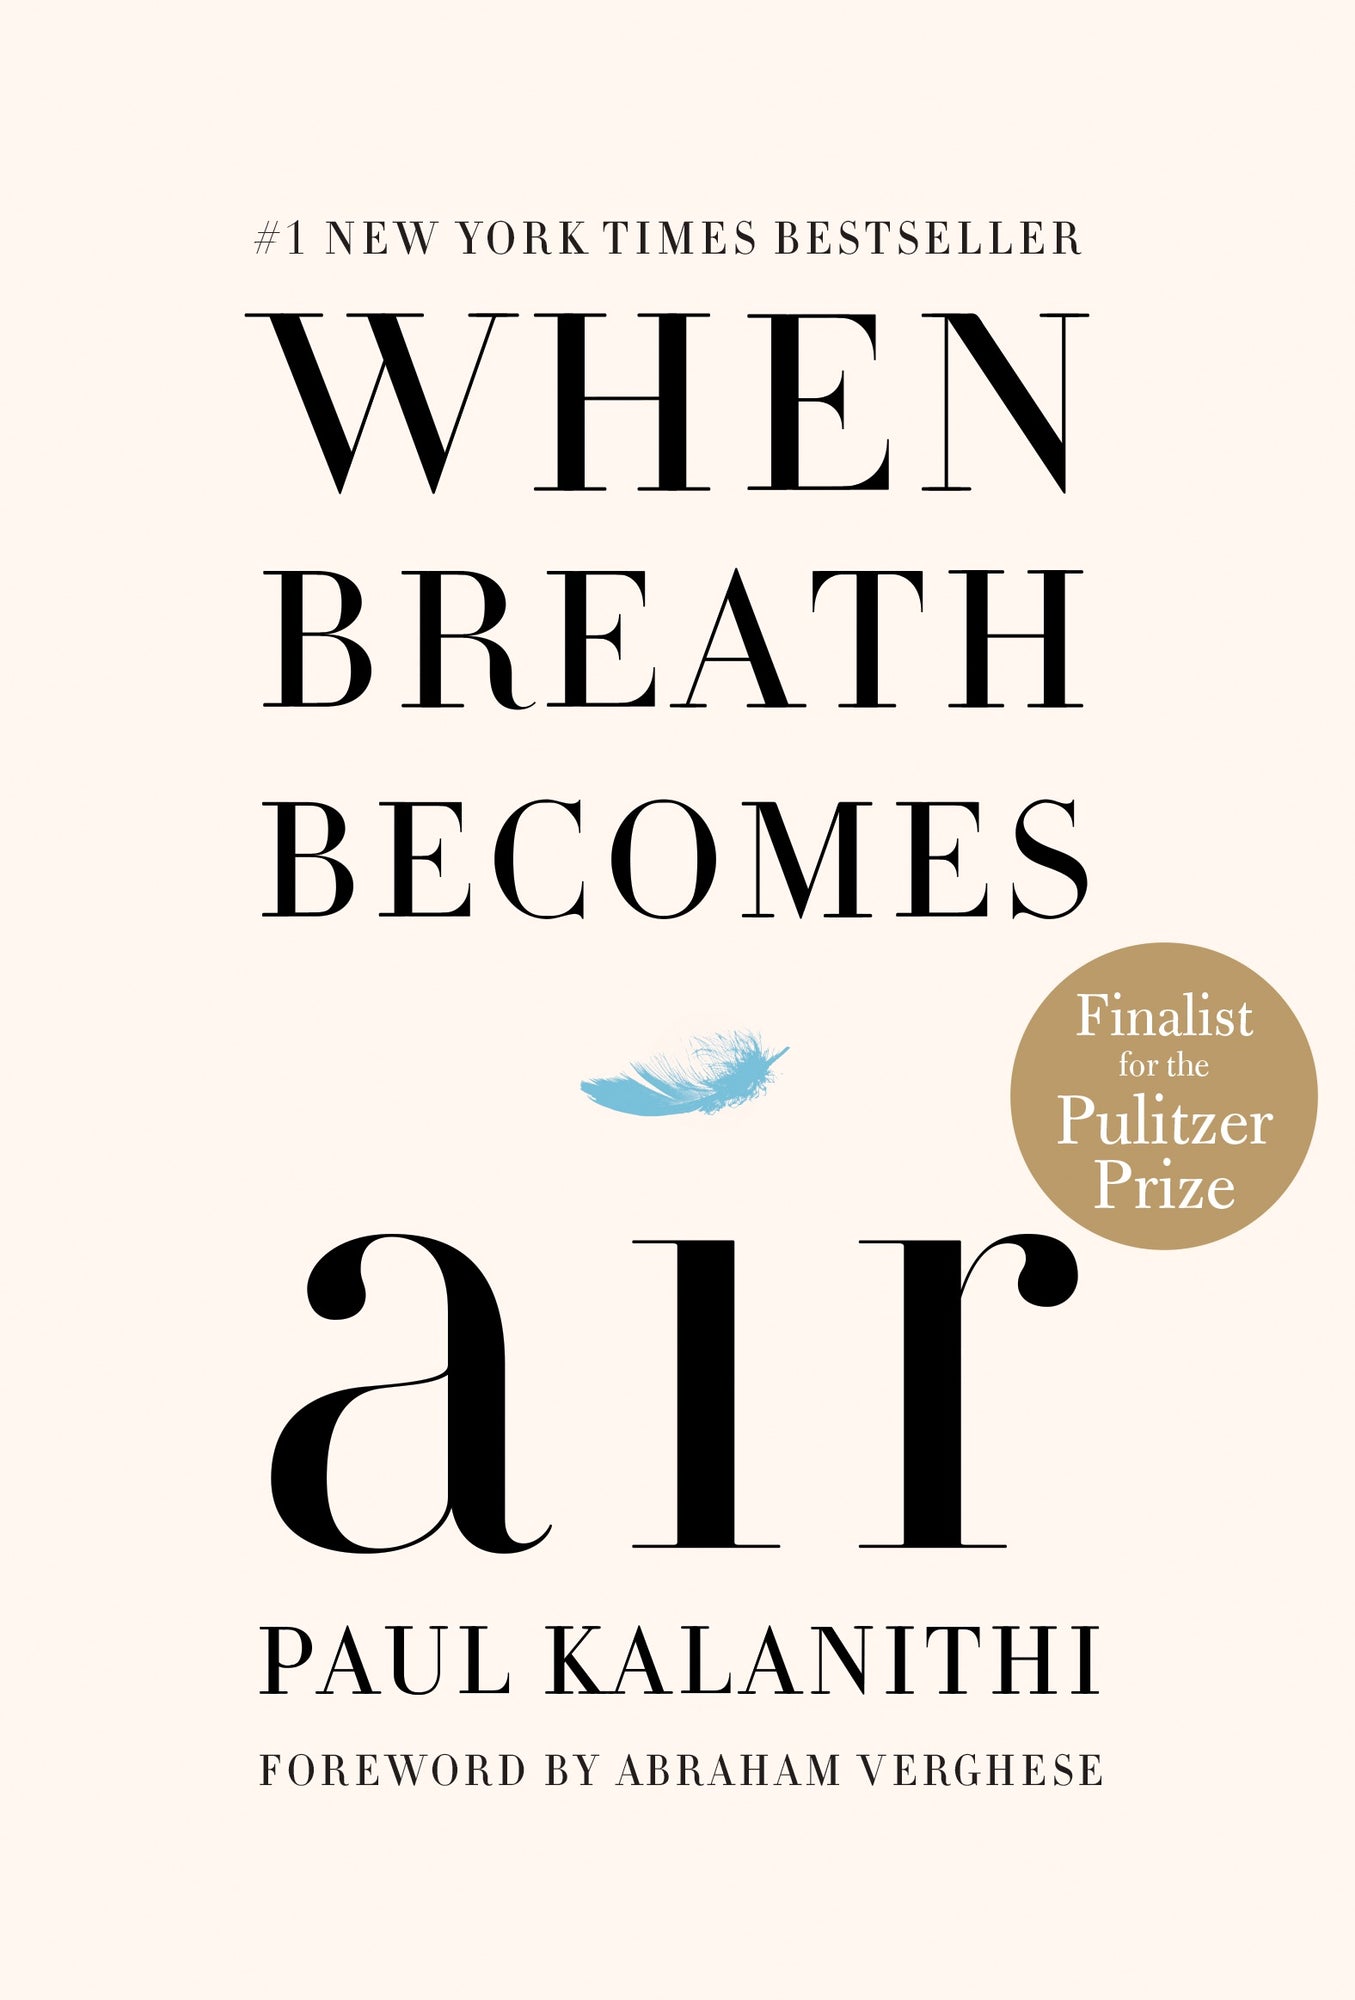 Book cover with "When Breath Becomes Air" written in large font, with a blue feather in between the word "Becomes" and "air". Paul Kalanithi written beneath the tite, beanth which "Foreword by Abraham Verghese" is written.